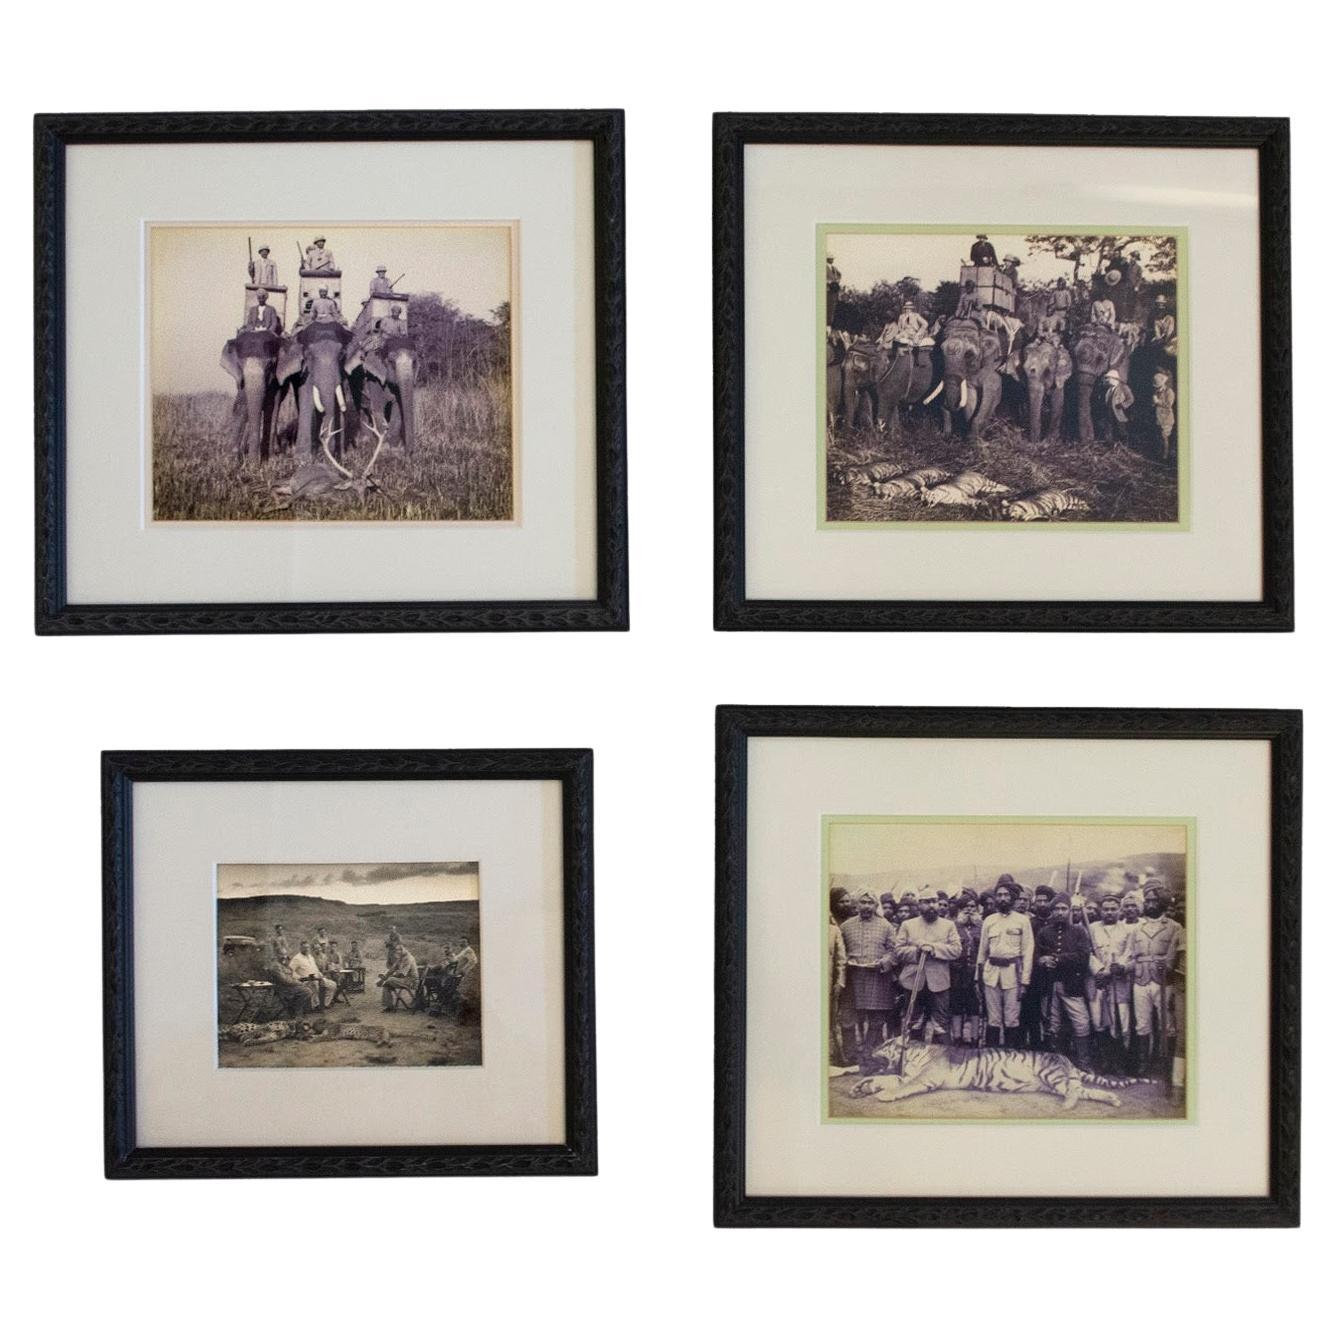 Antique 1930s Photos of a Tiger Hunt in Colonial India